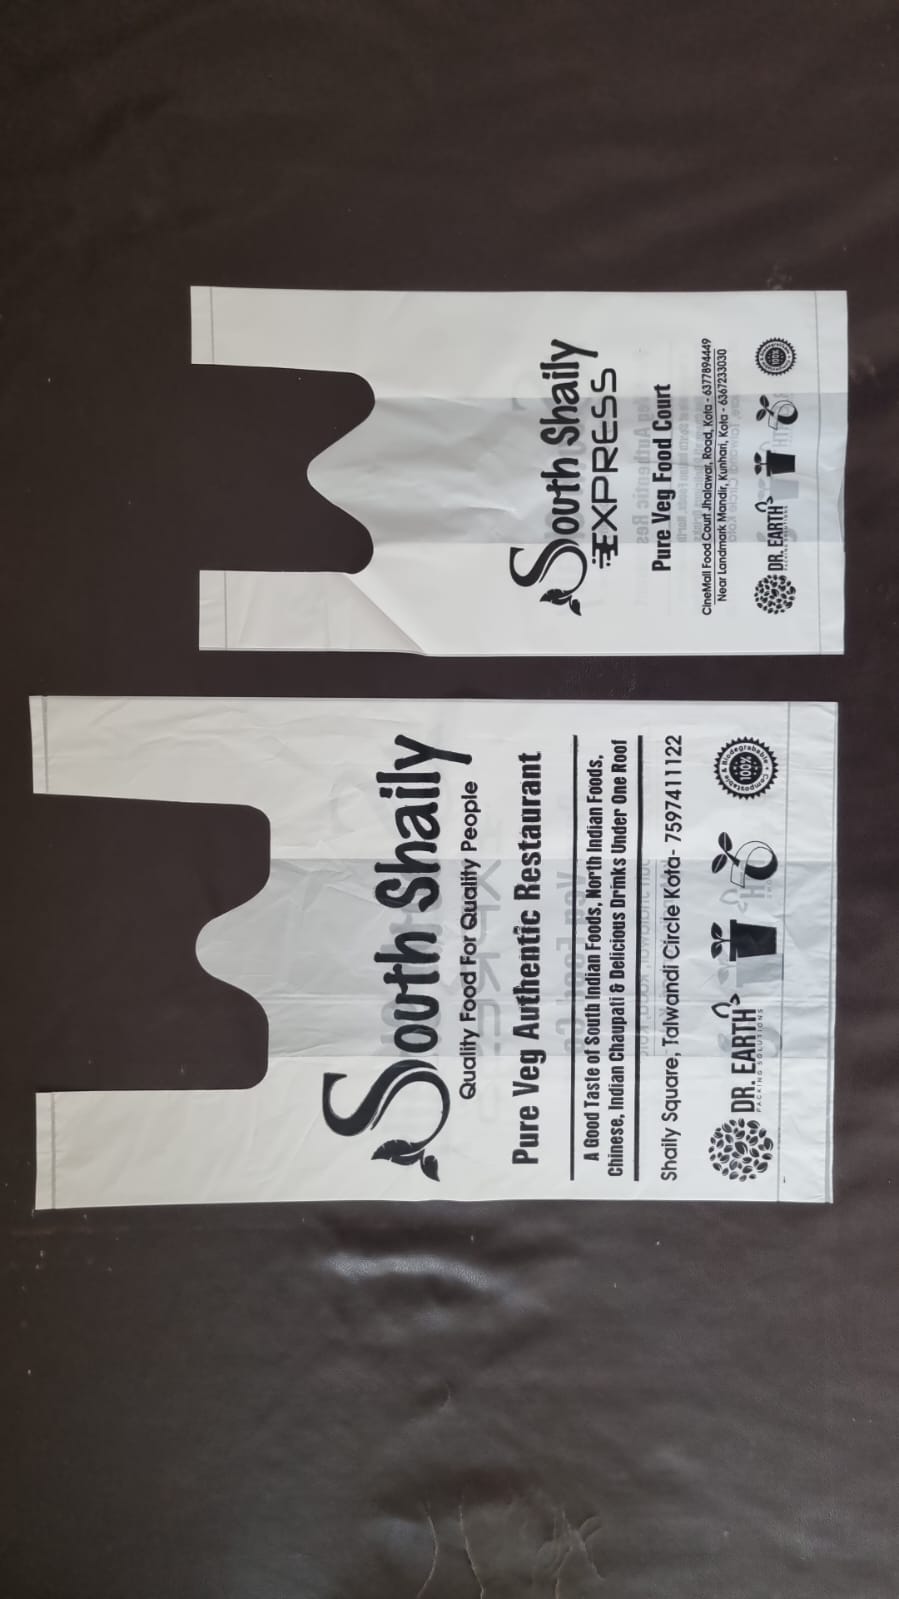 100% home compostable certified bio plastic bags